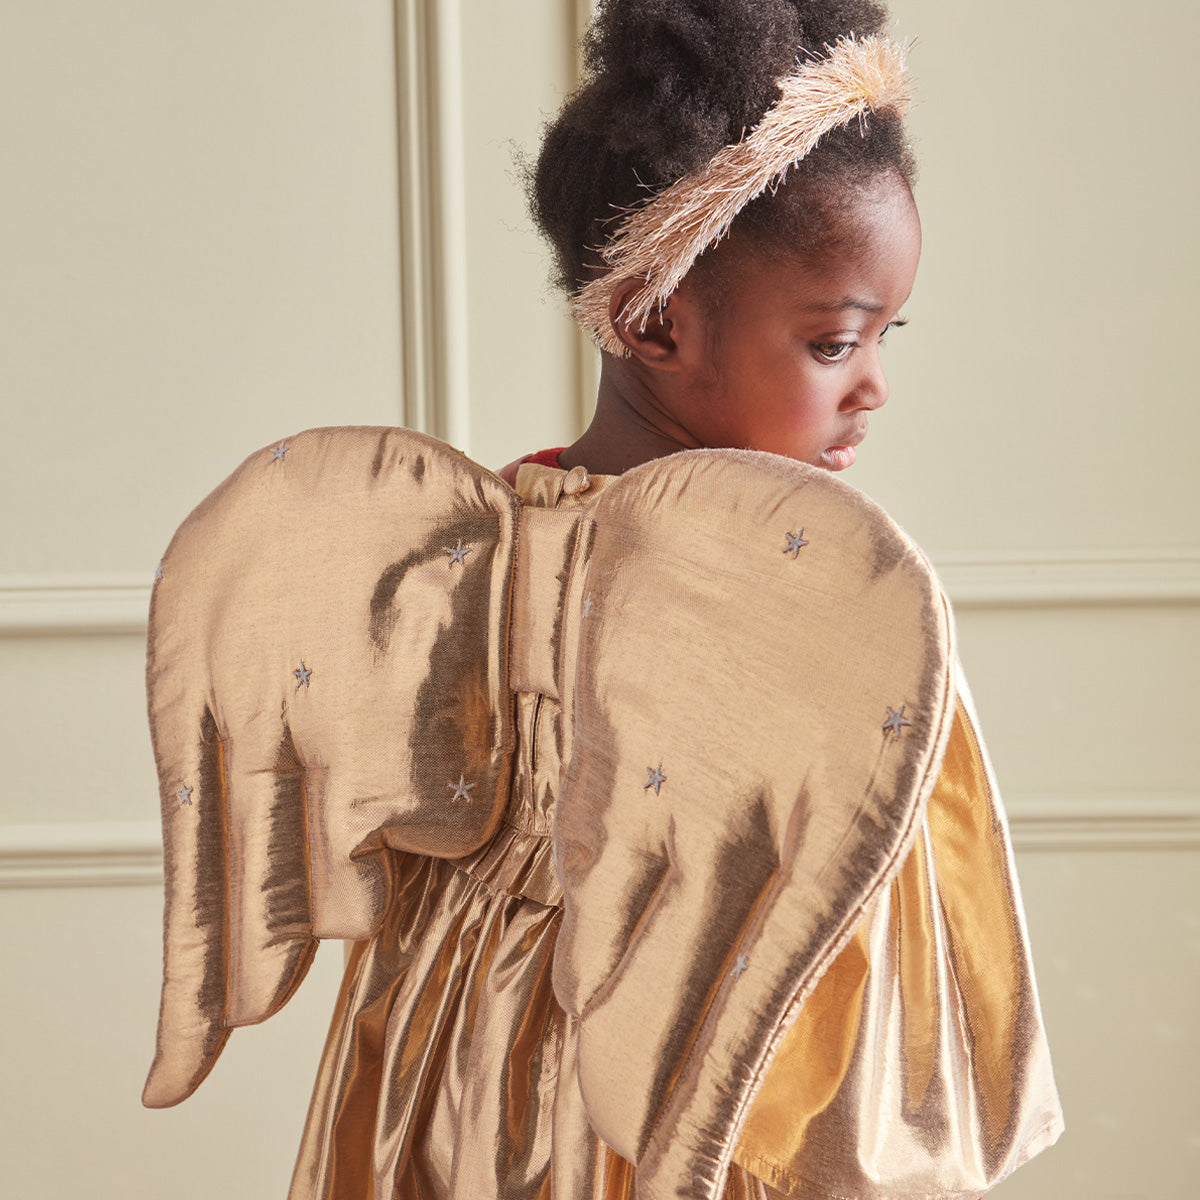 Our gold angel wings and gold angel handband are perfect kids' Christmas costumes.